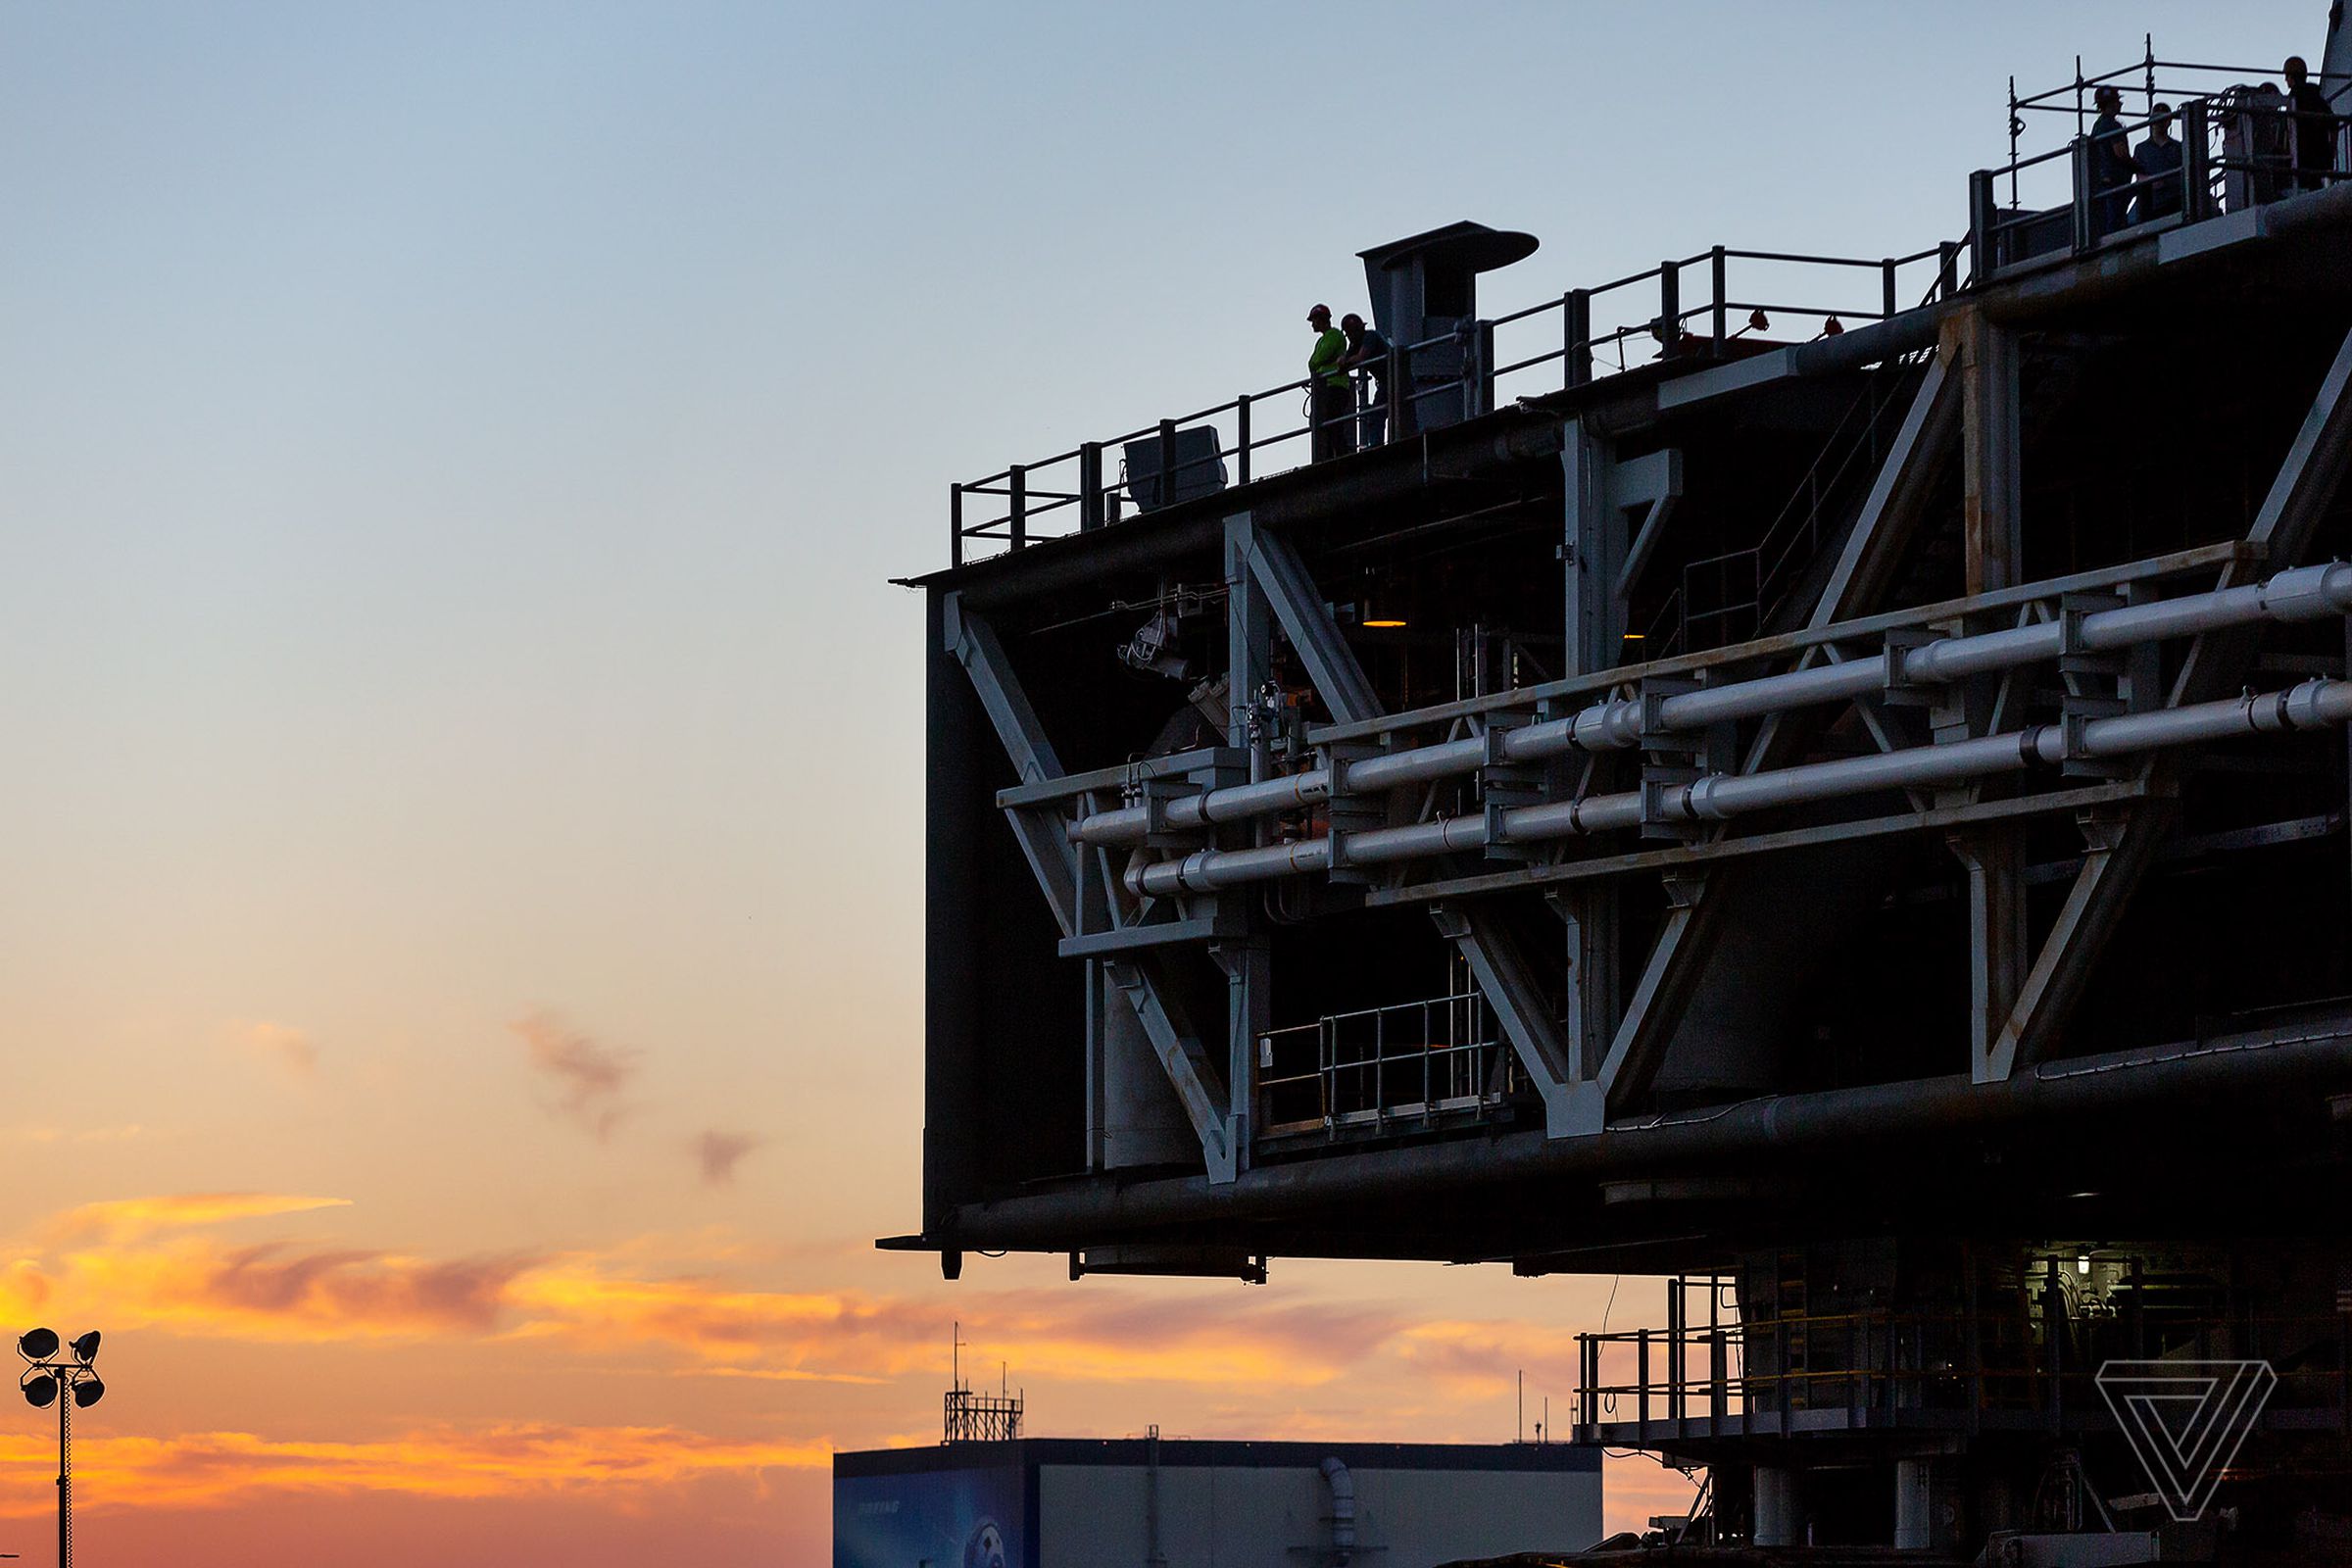 The Sun sets behind the mobile launch platform, as workers look over the edge.